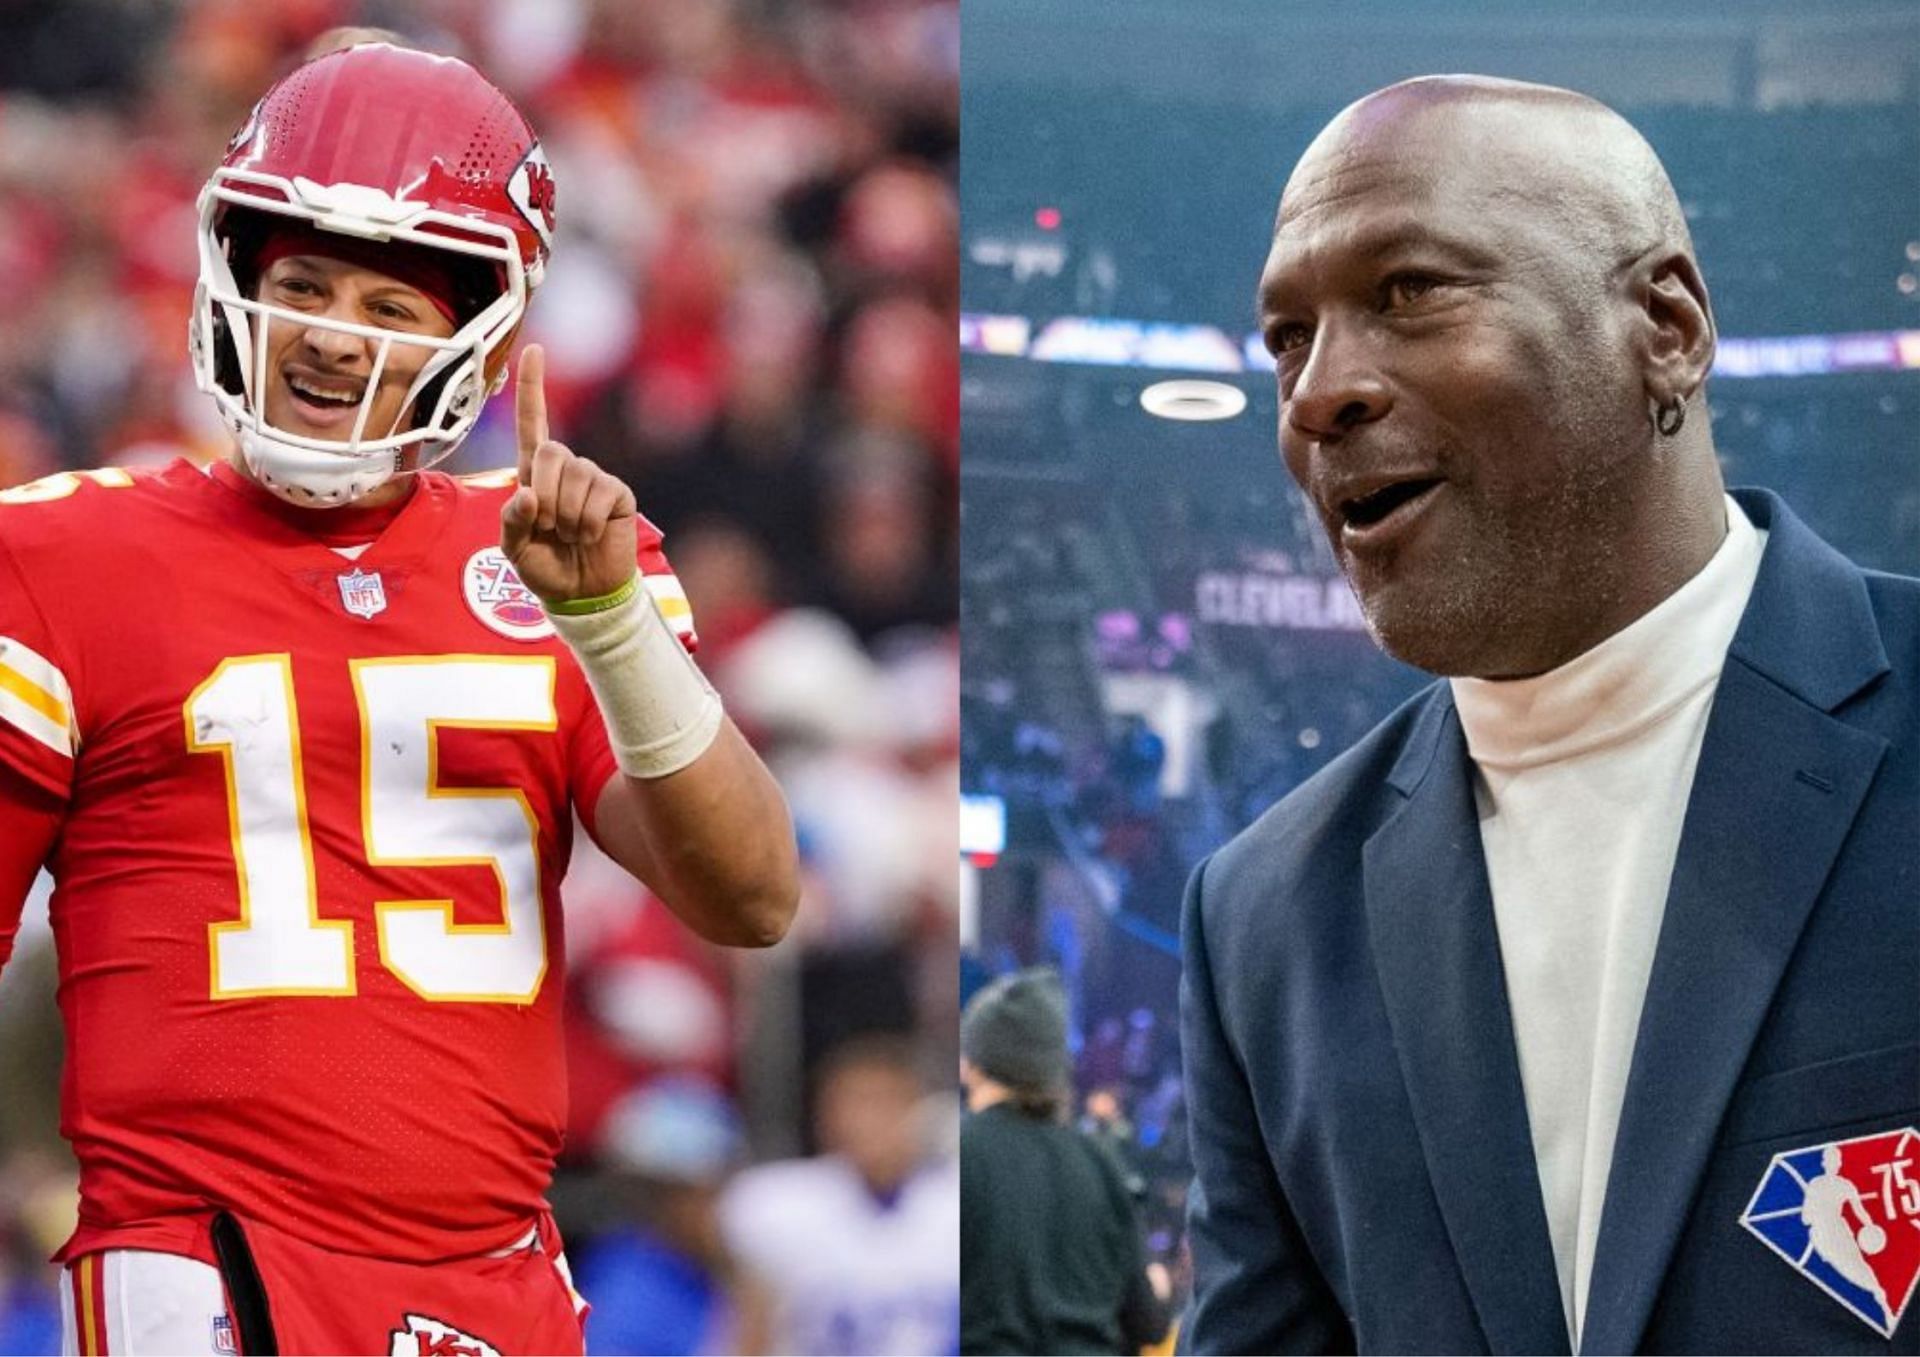 Michael Jordan and Patrick Mahomes both had incredible starts to their careers in basketball and football, respectively. [photo: SportsRush]